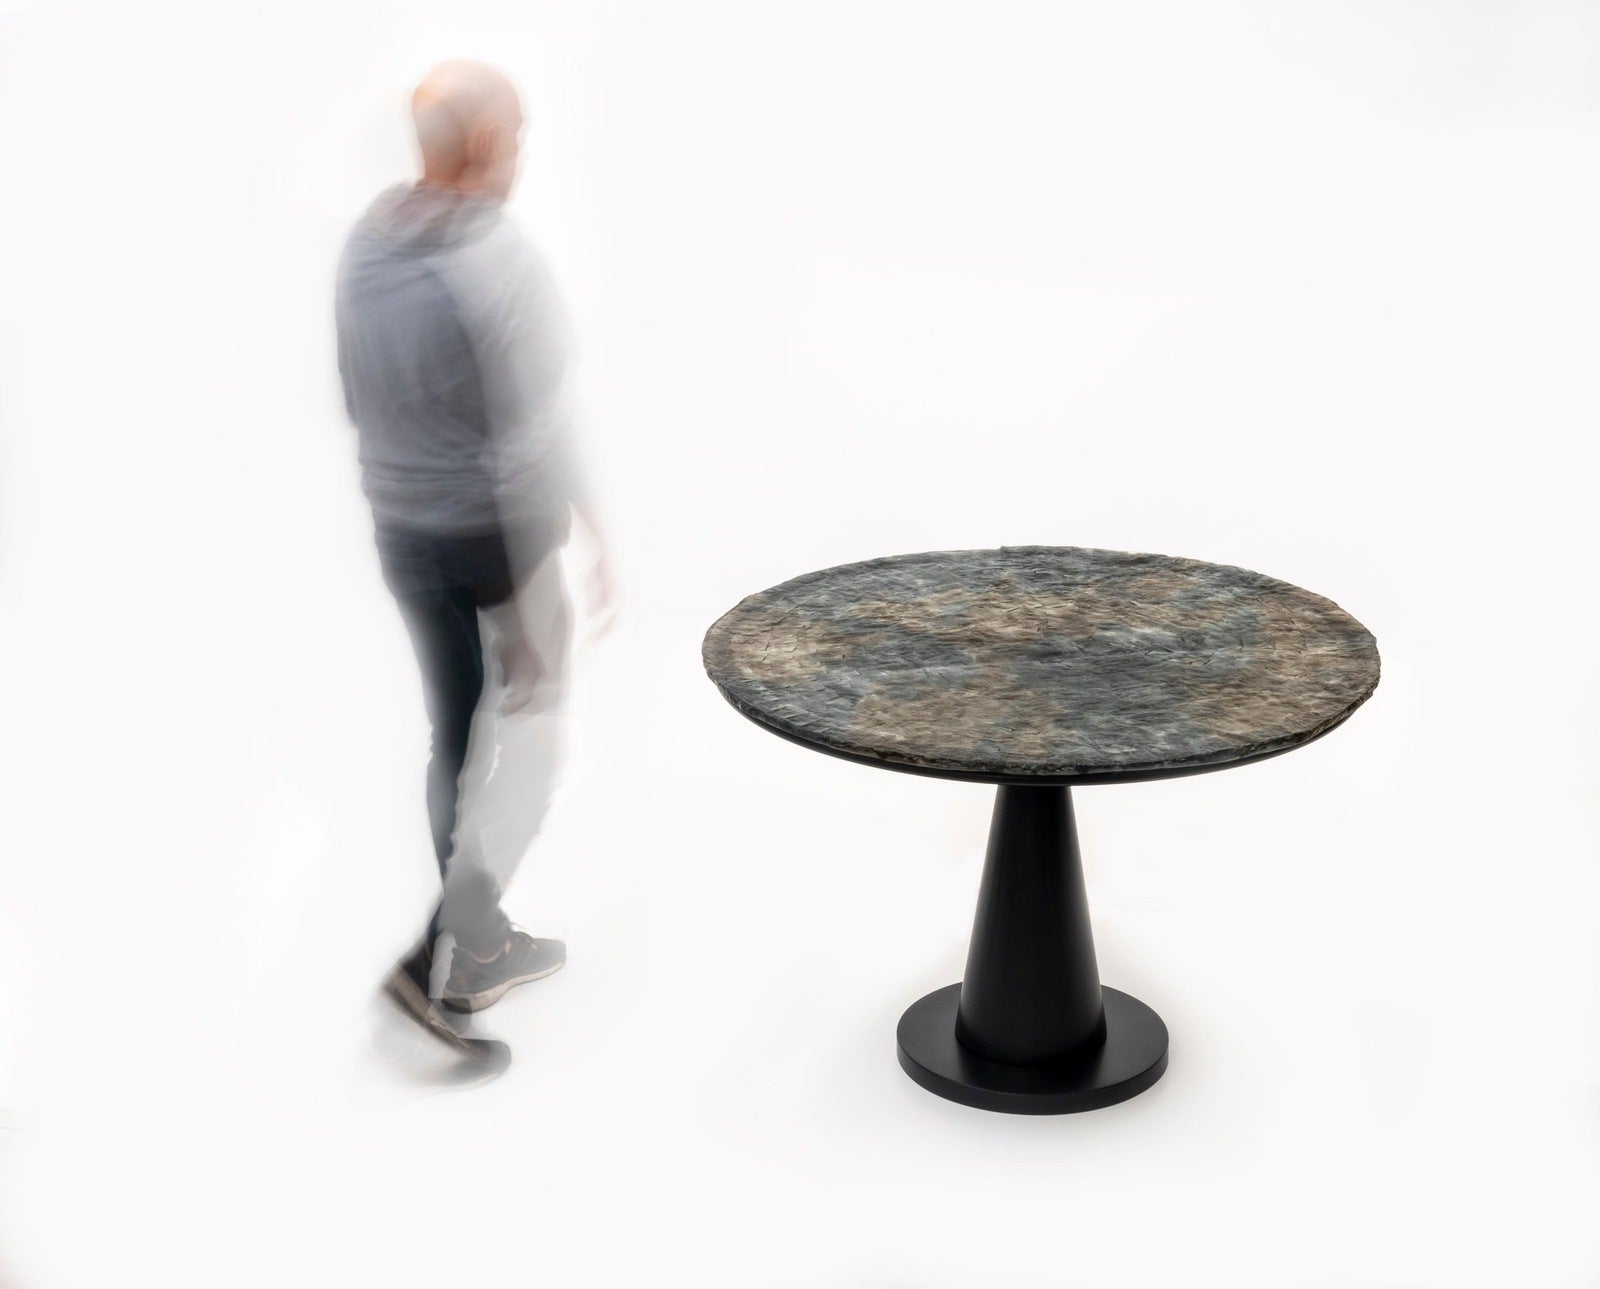 Large Strait Round Table with a person